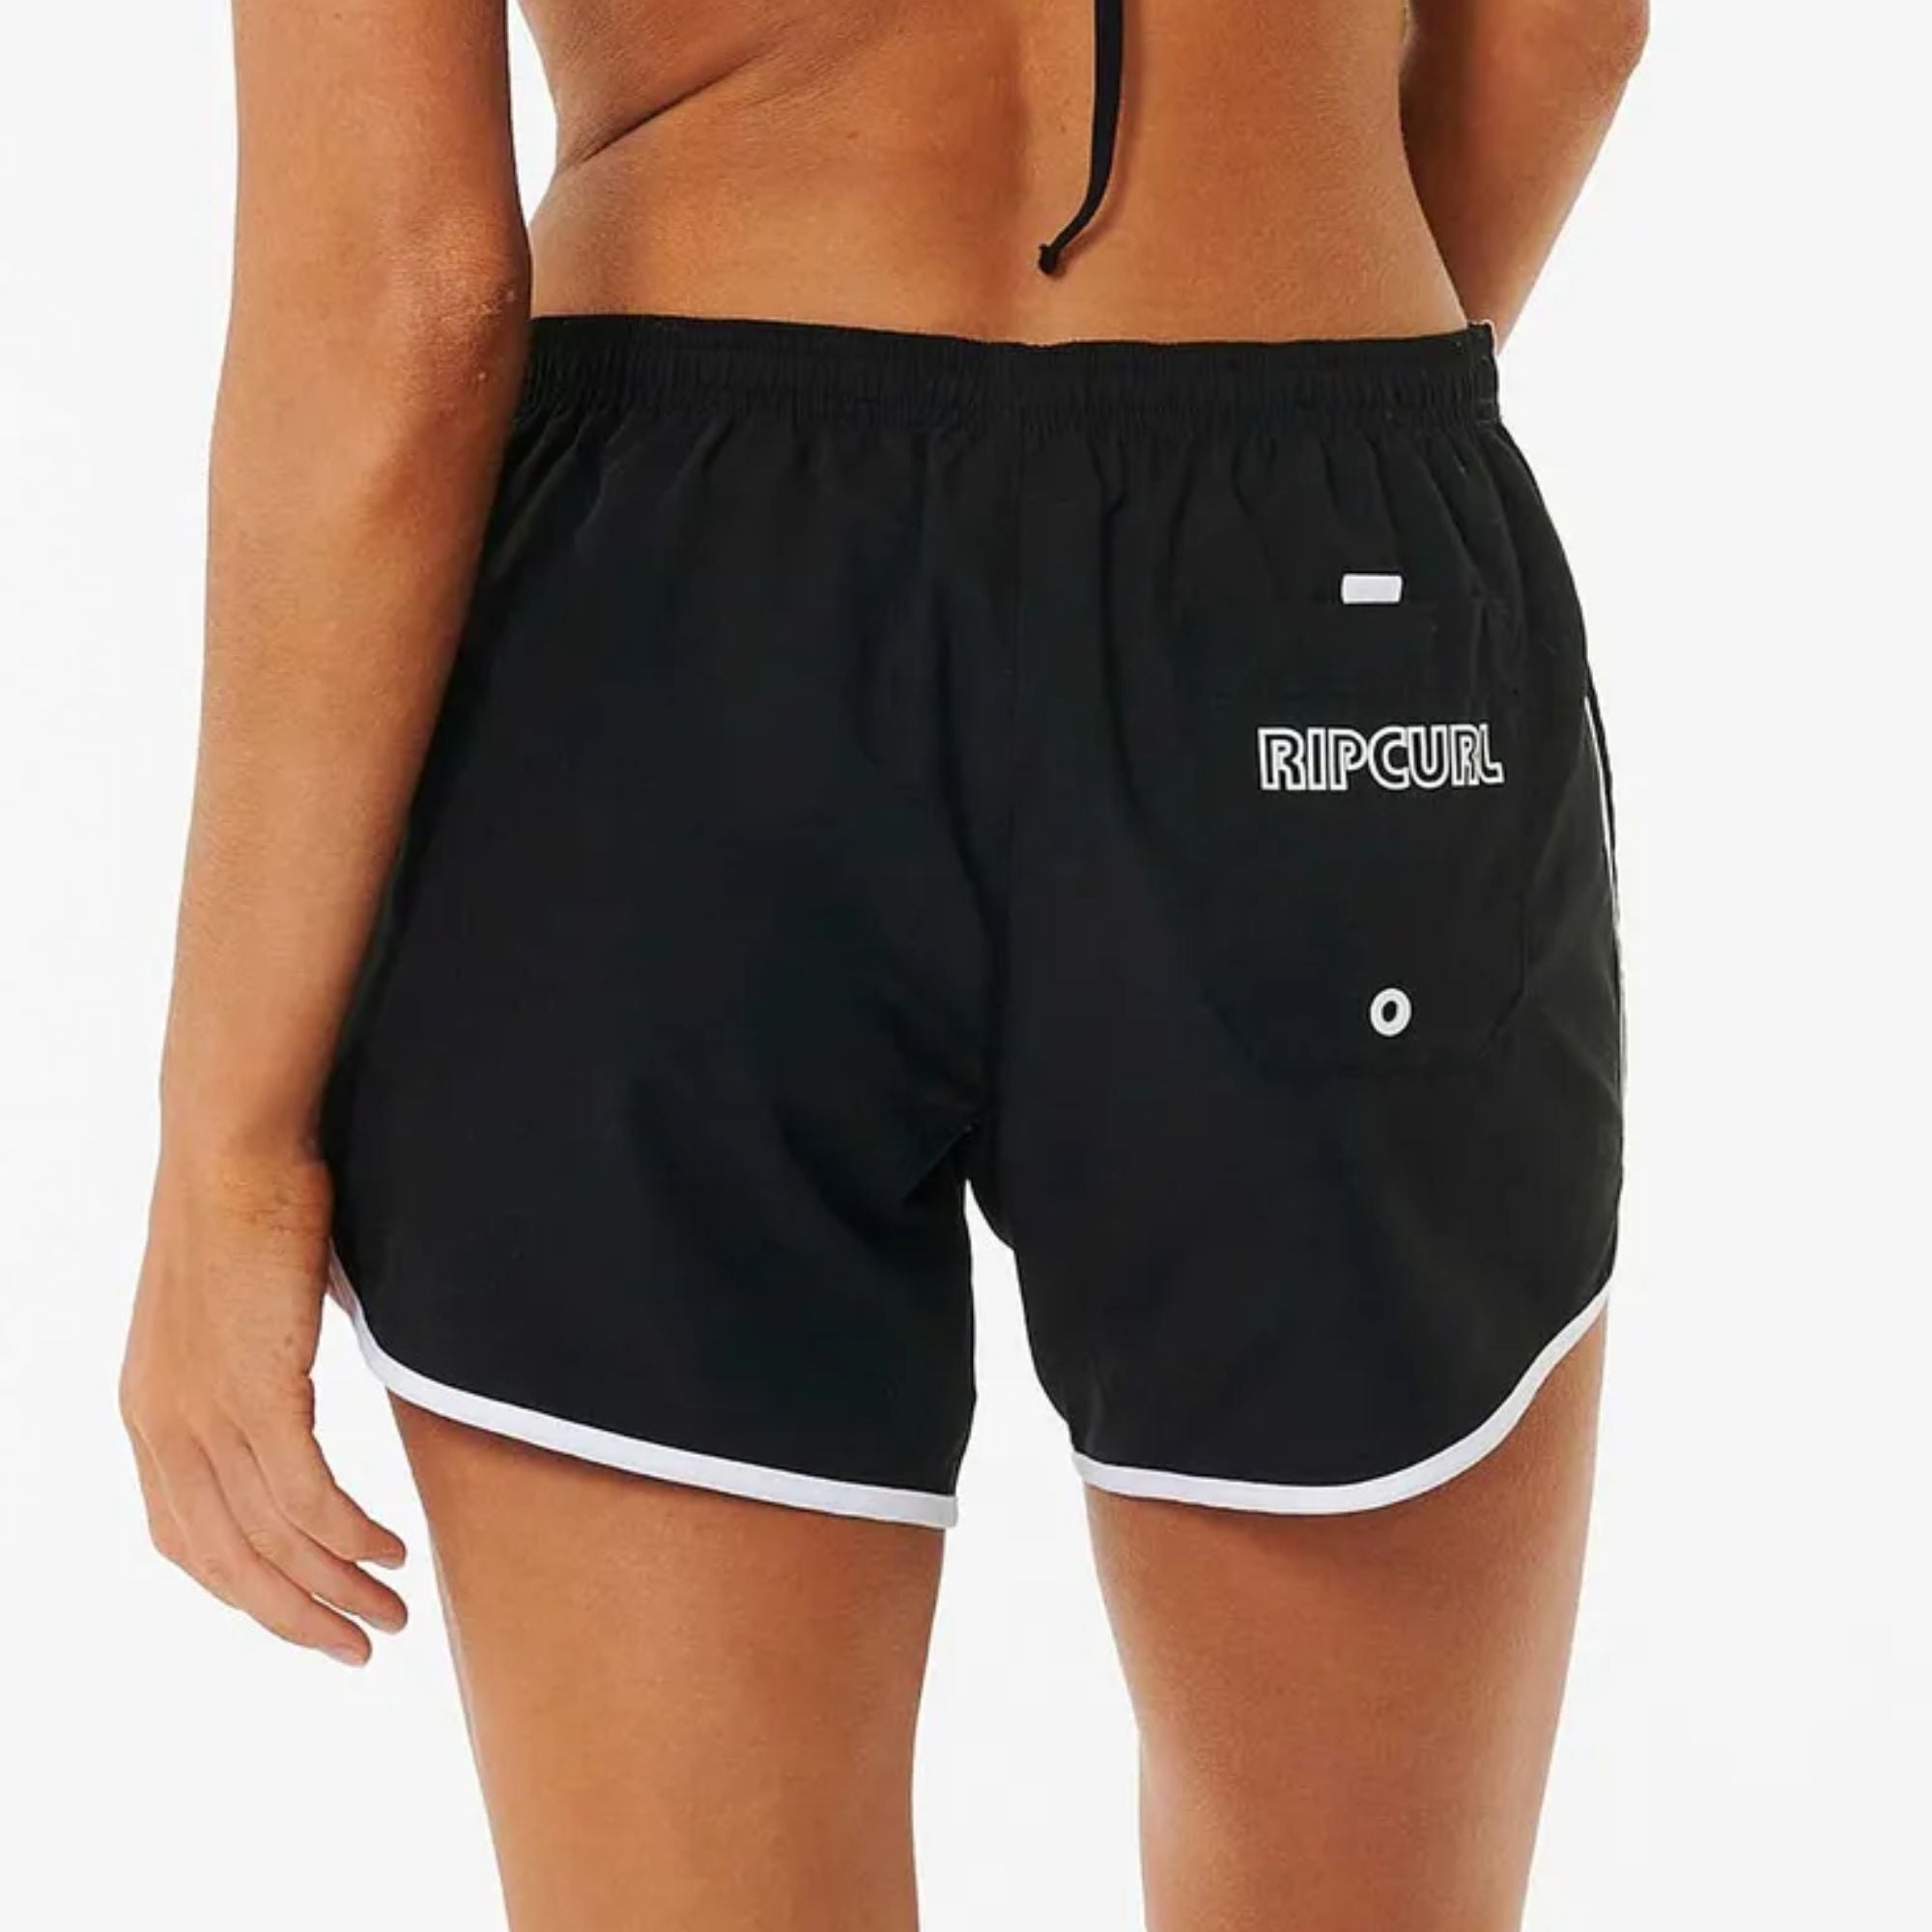 Ripcurl Women's Out All Day 5" Boardshort | RIPCURL | Portwest - The Outdoor Shop